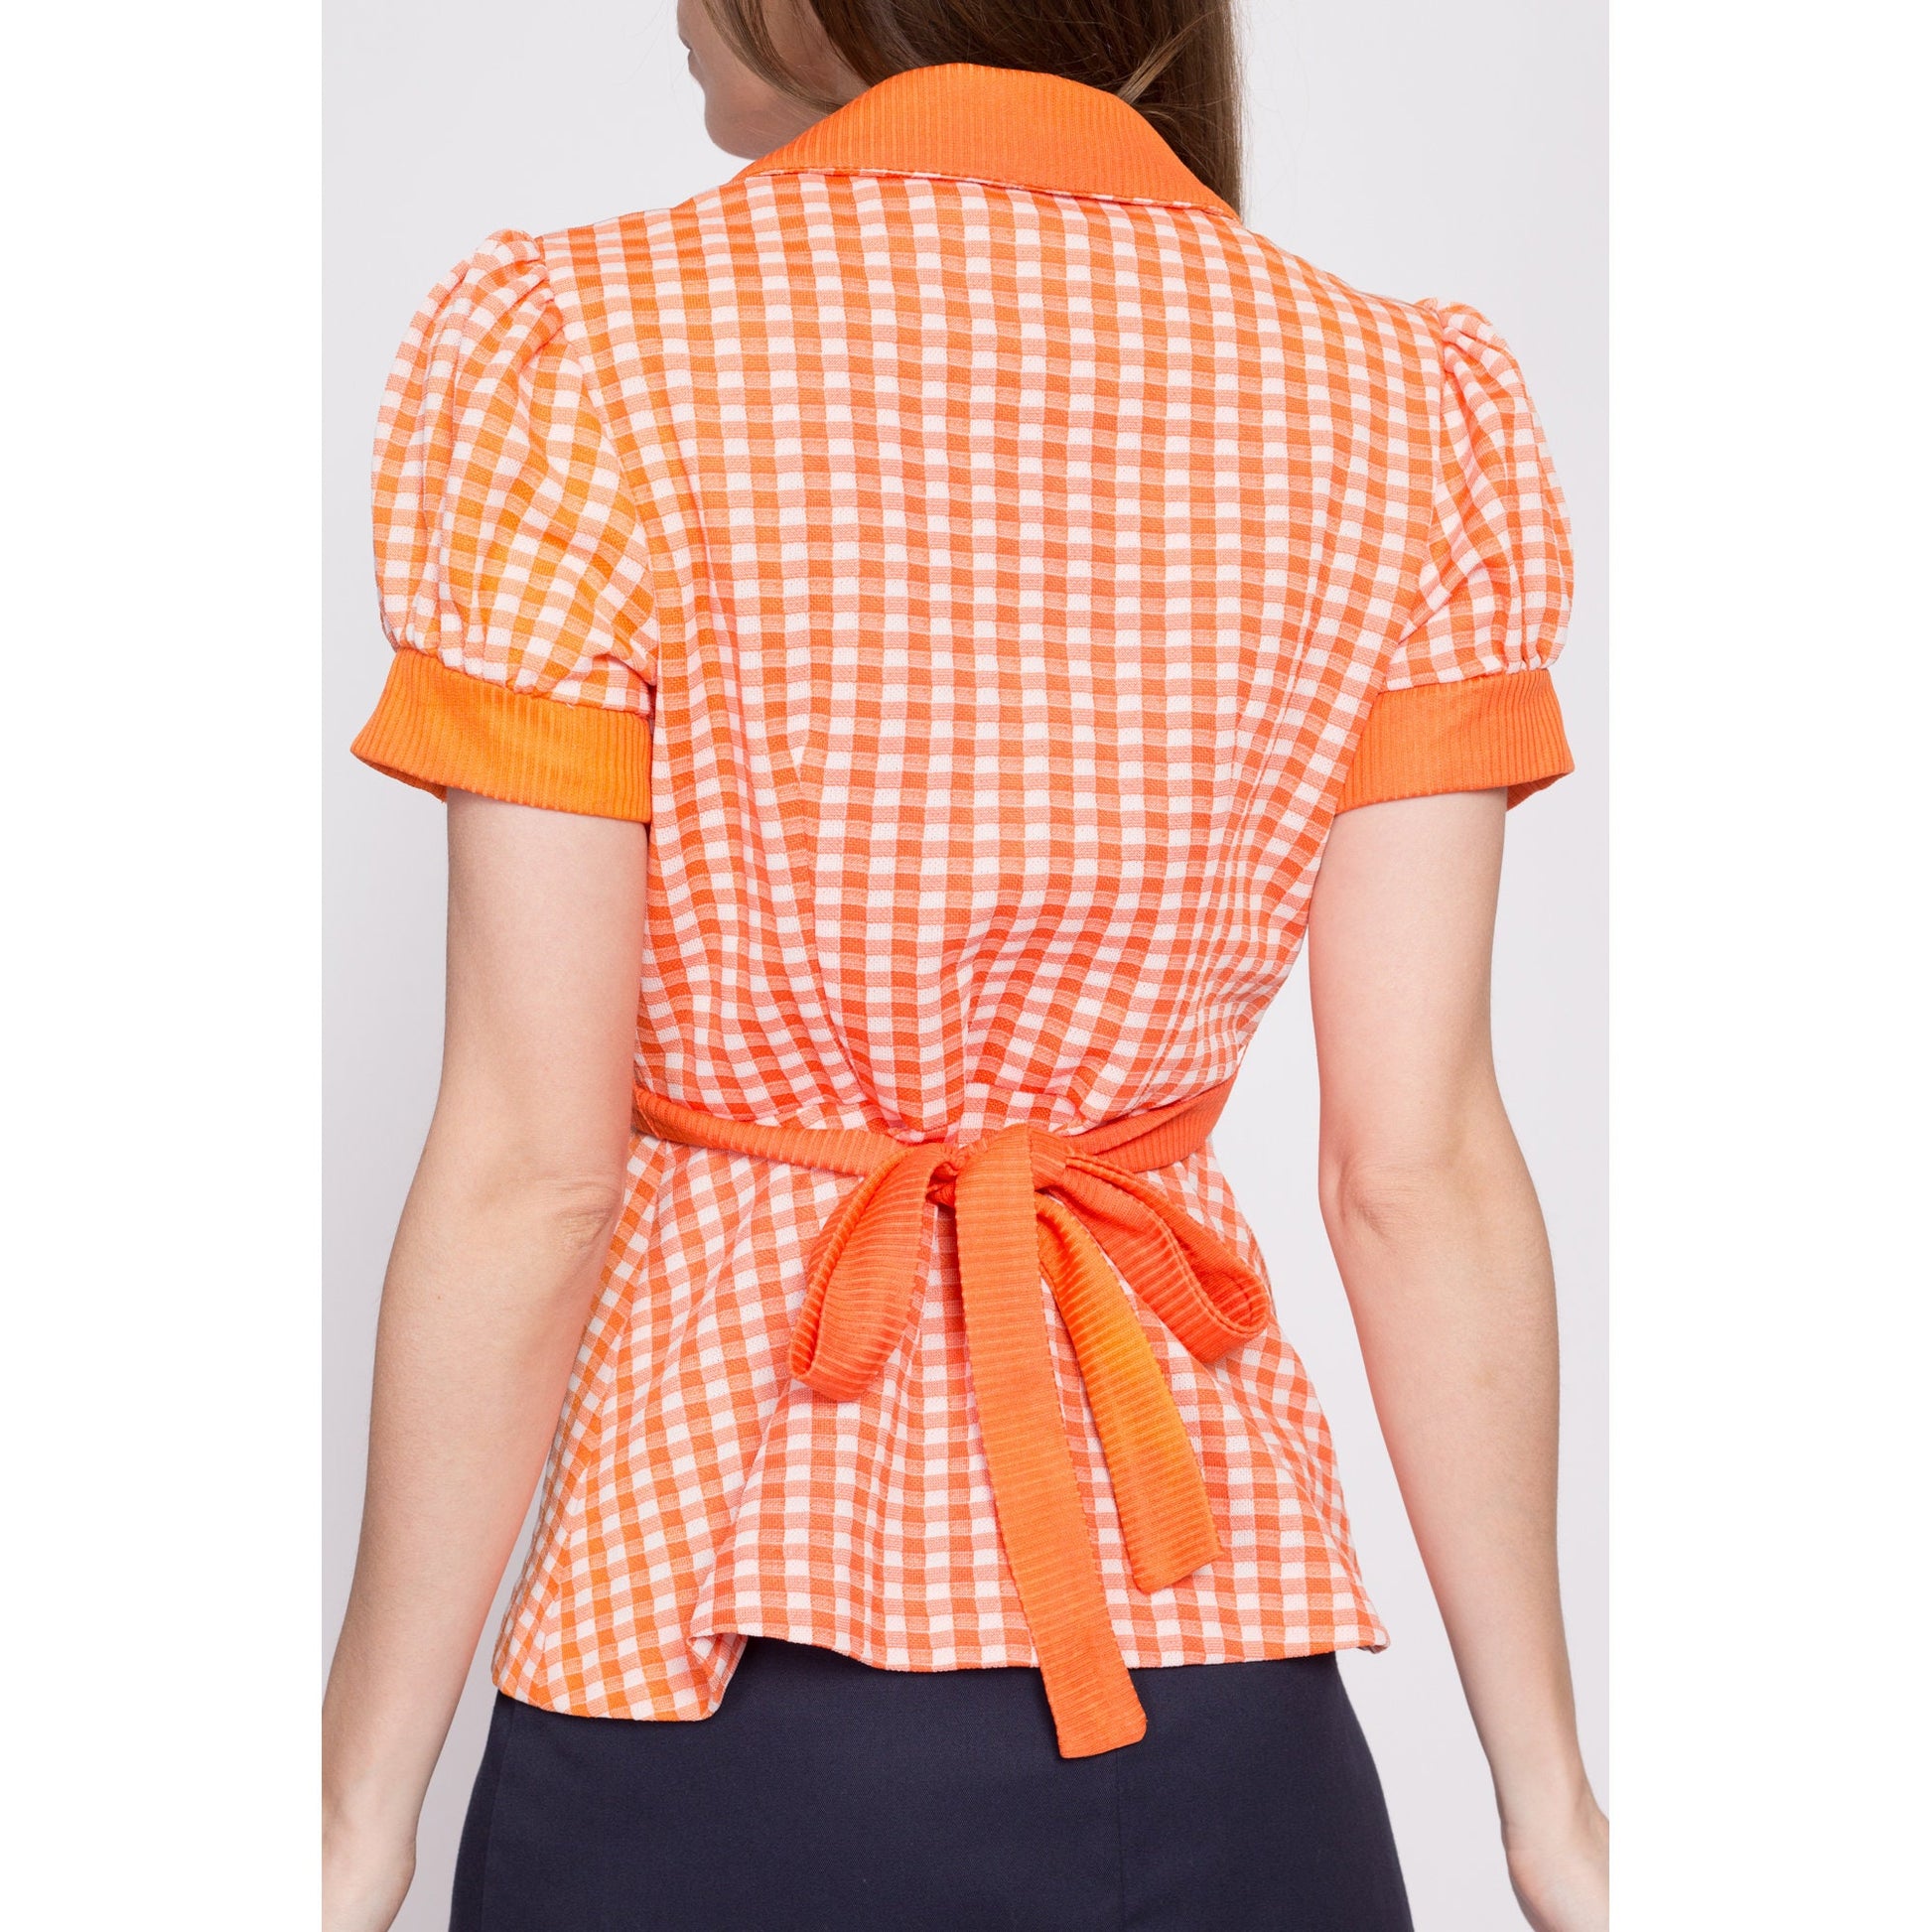 70s Orange Gingham Puff Sleeve Top - Small | Retro Vintage Petal Collar Button Up Collared Shirt